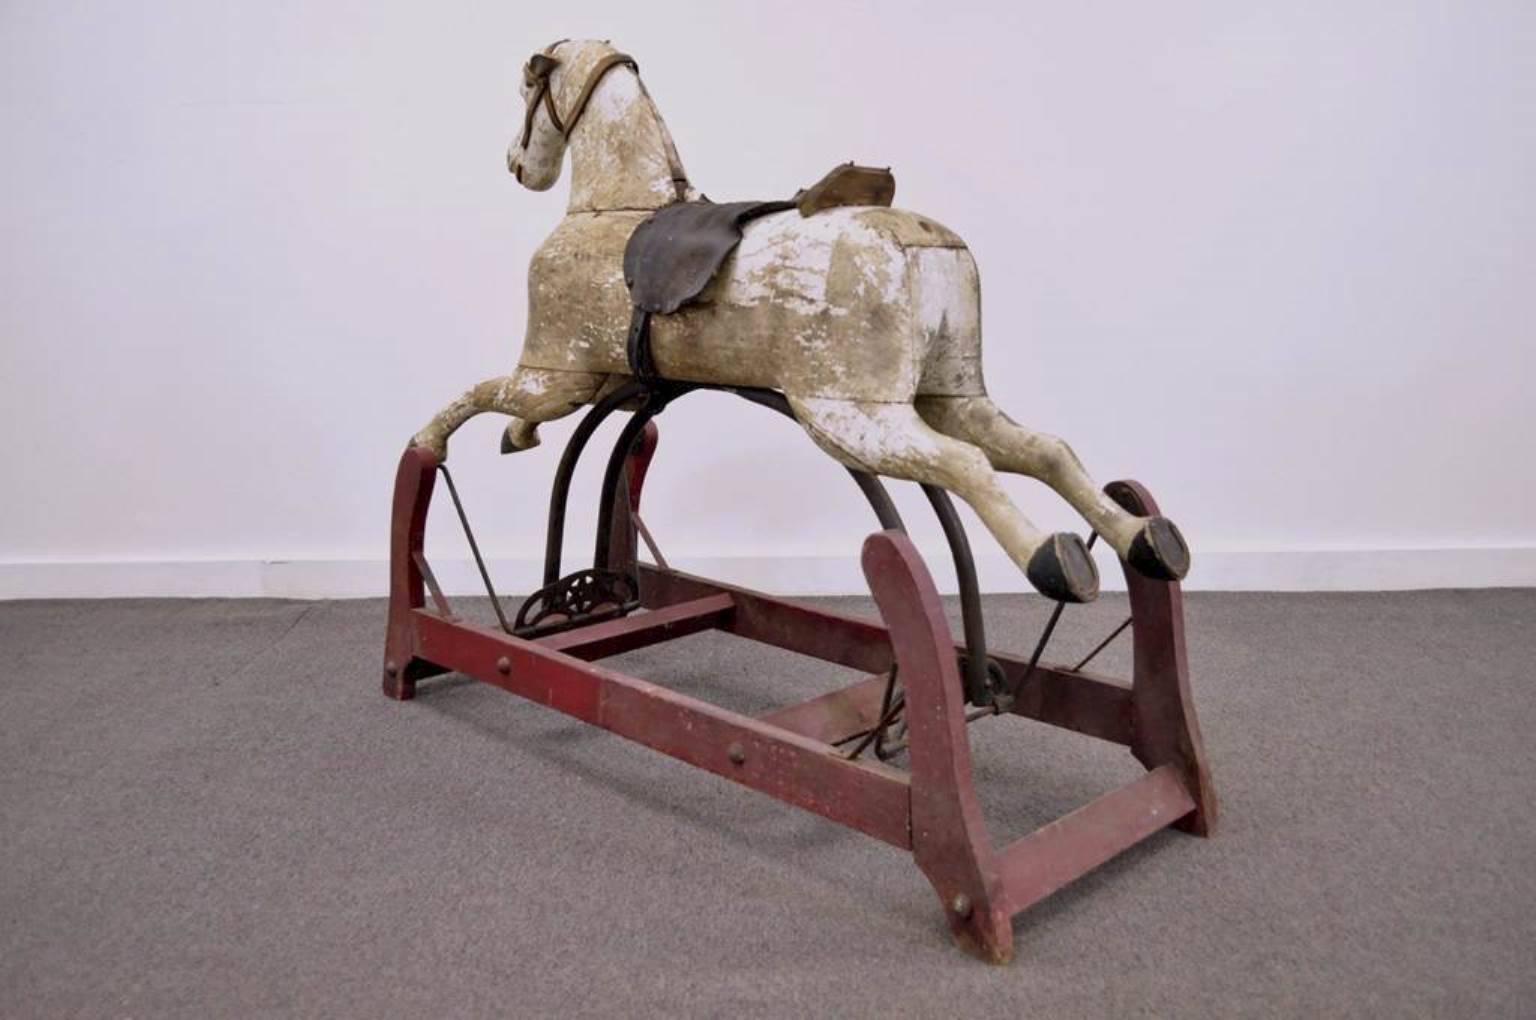 19th Century American Primitive Carved Wood Cast Iron Glider Rocking Hobby Horse For Sale 4